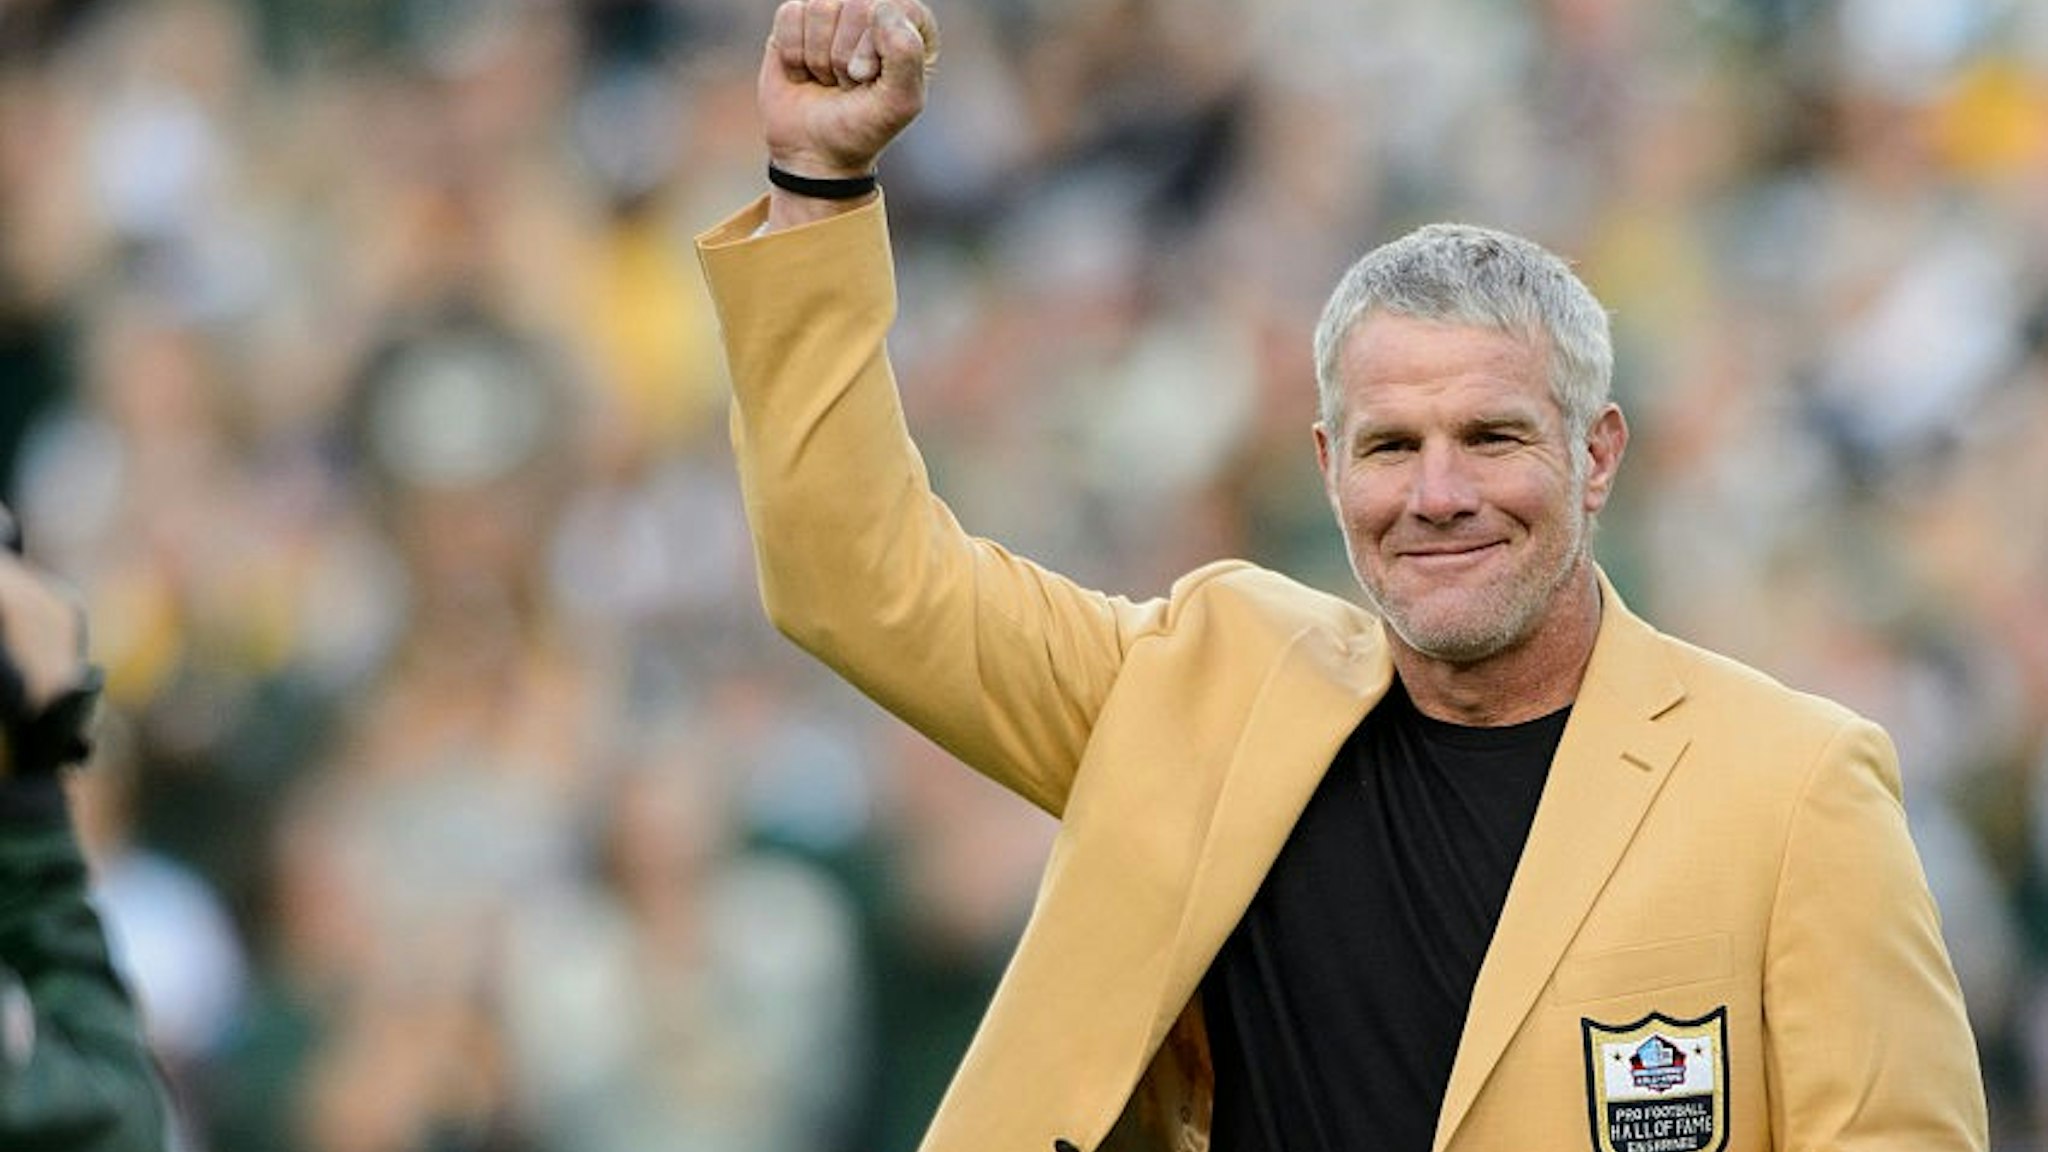 GREEN BAY, WI - OCTOBER 16: Former NFL quarterback Brett Farve looks on as he is inducted into the Ring of Honor during a halftime ceremony during the game between the Green Bay Packers and the Dallas Cowboys on October 16, 2016 at Lambeau Field in Green Bay, Wisconsin. The Cowboys defeated the Packers 30-16. (Photo by